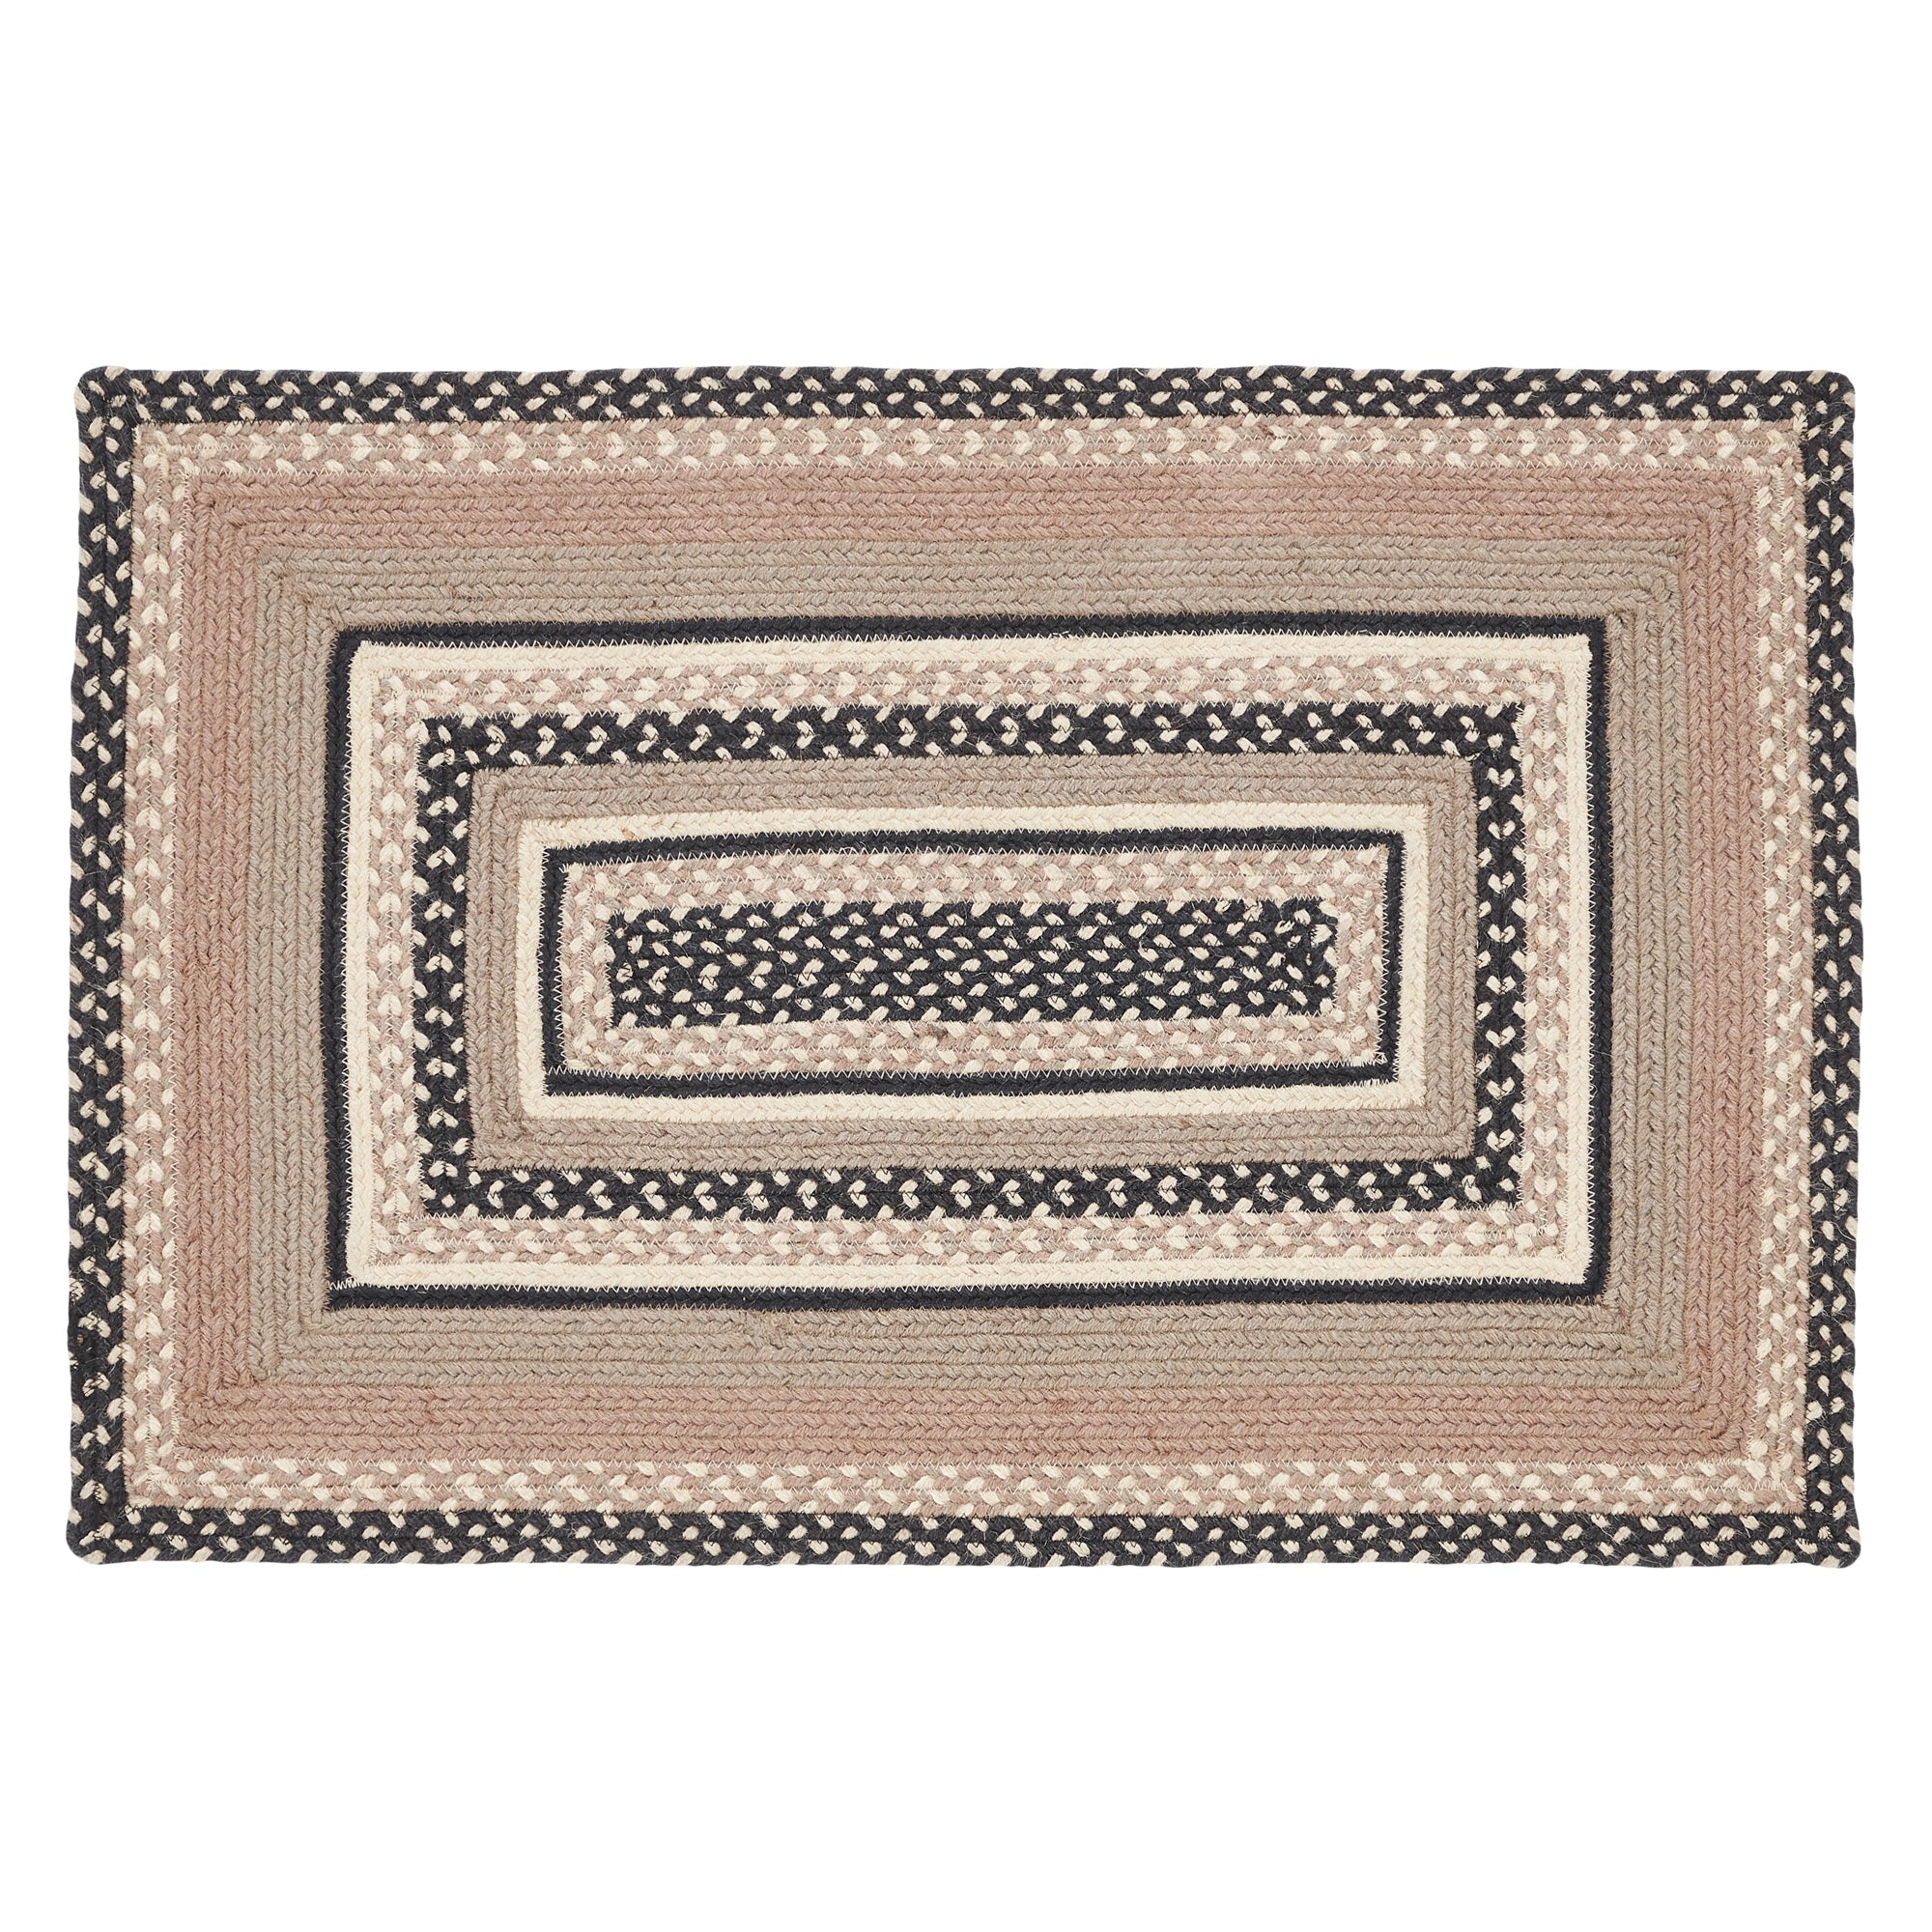 April & Olive Sawyer Mill Charcoal Creme Jute Rug Rect w/ Pad 24x36 By VHC Brands